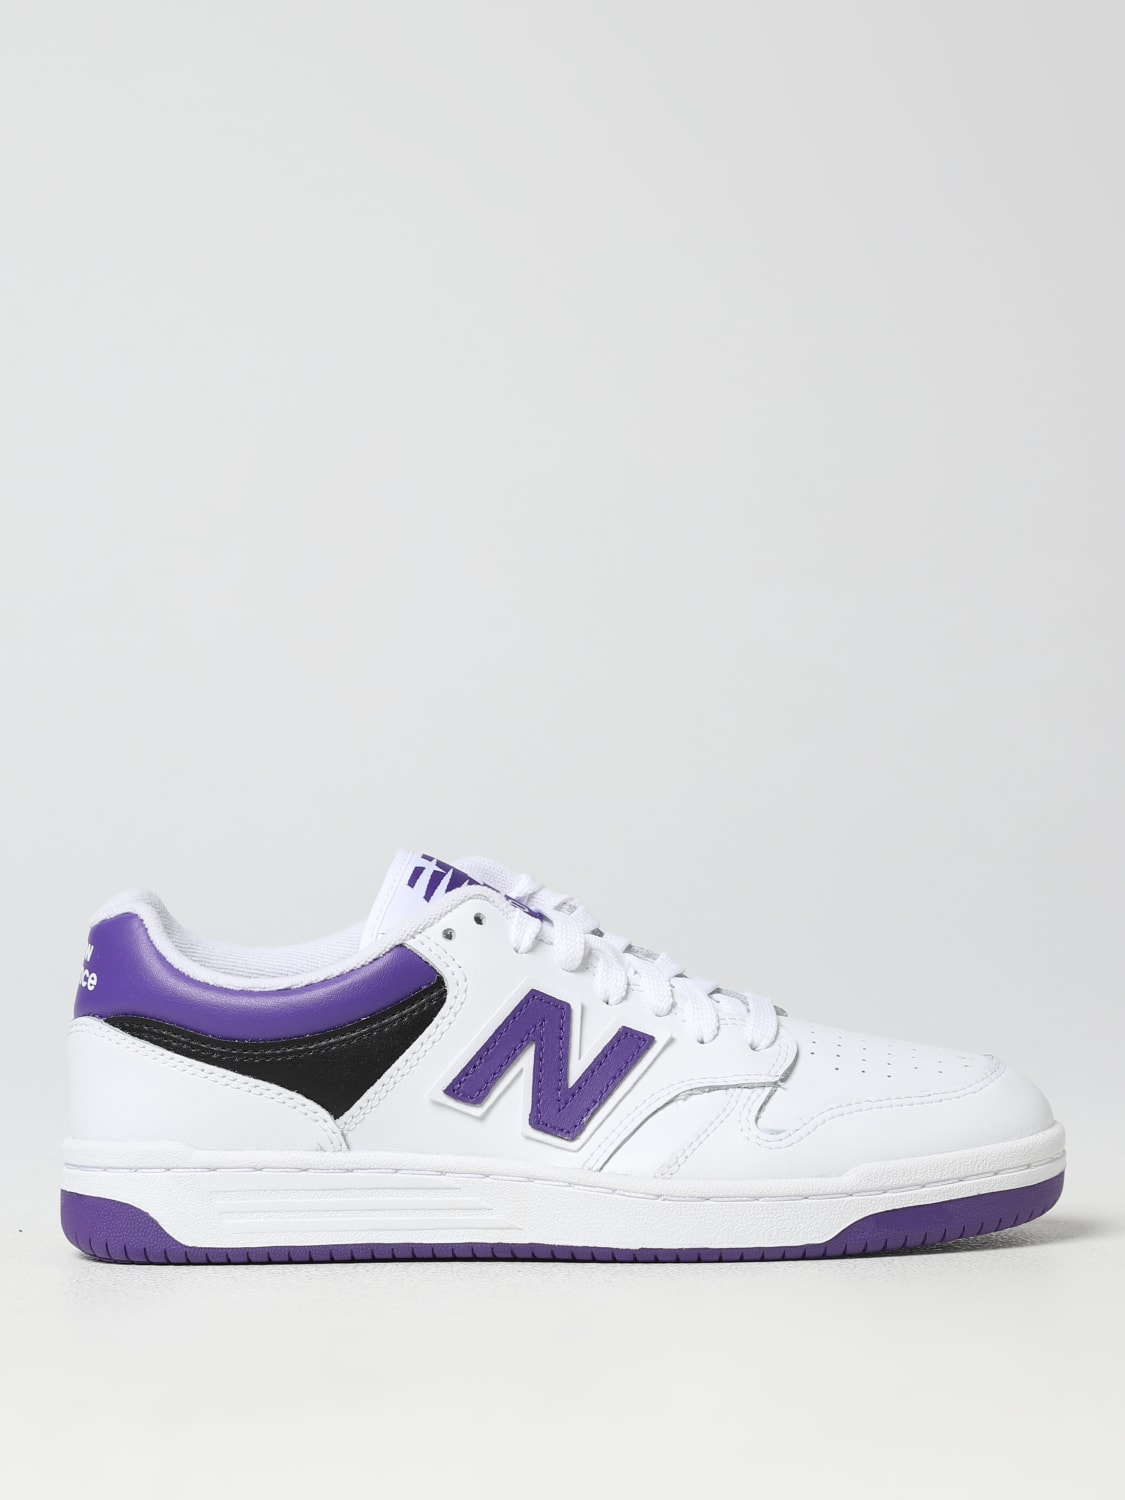 Sneakers 480 New Balance in pelle